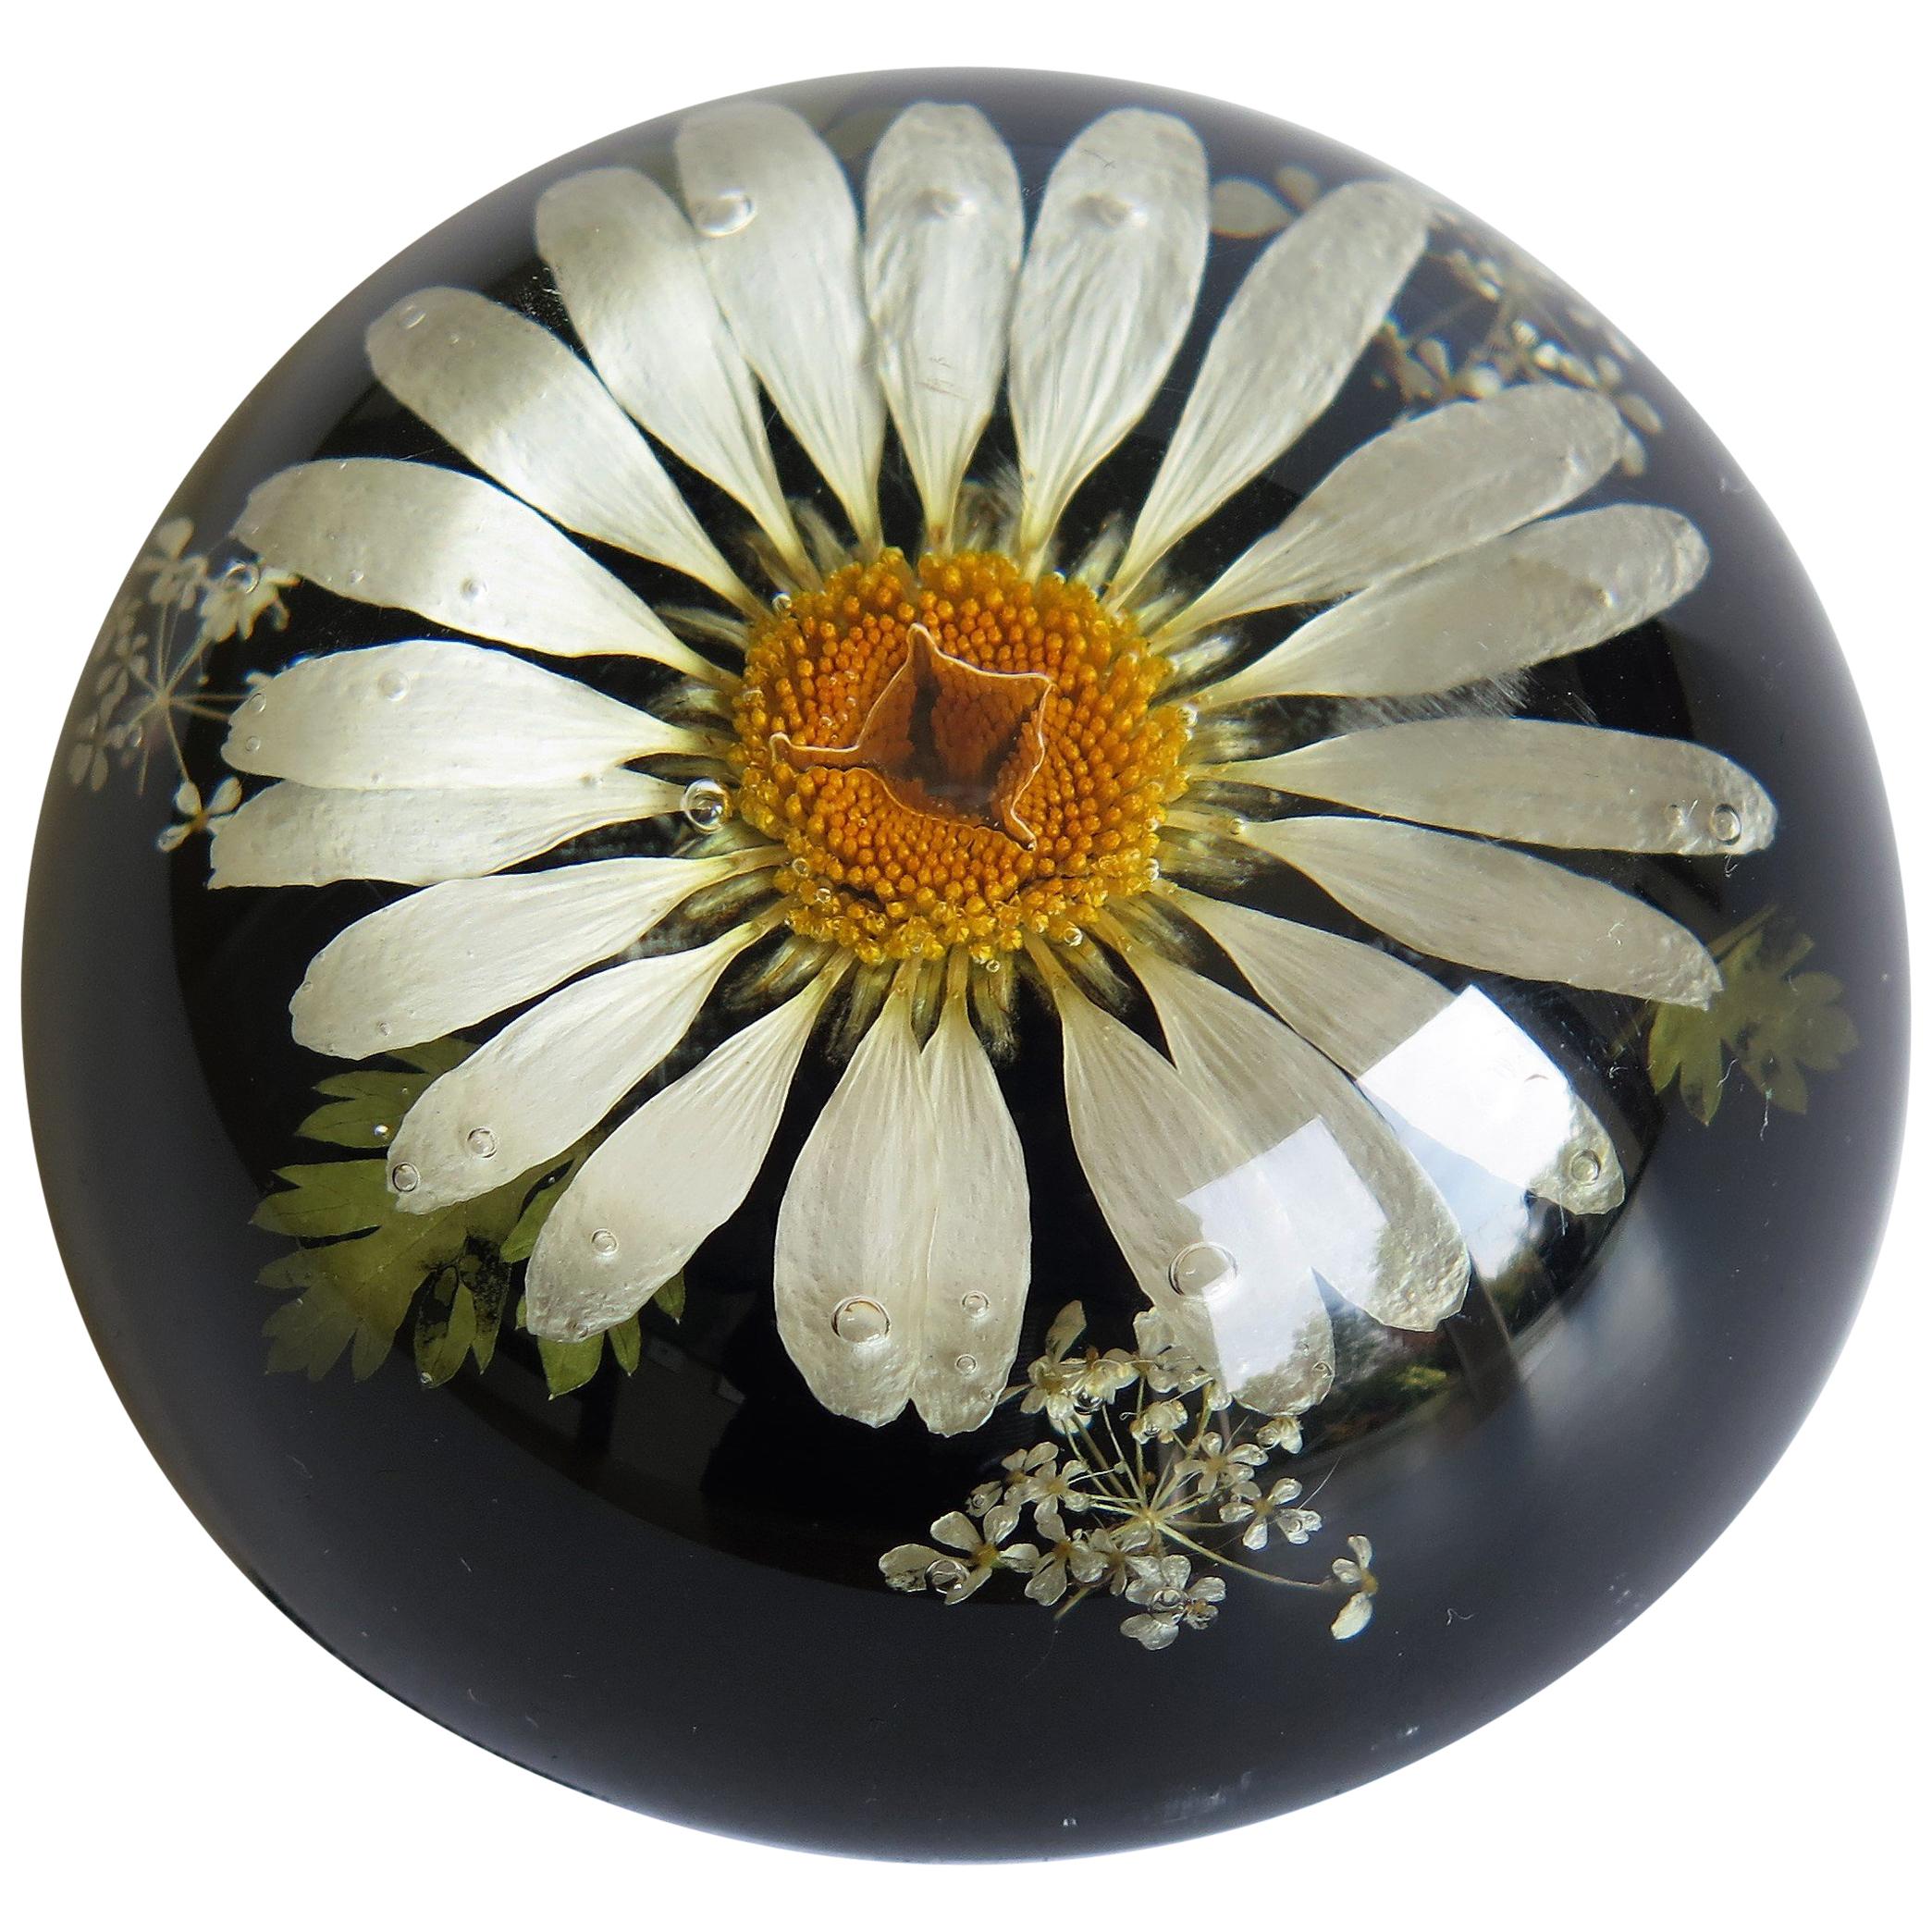 Daisy Paperweight Handmade with Real Flowers by Sarah Rogers, English